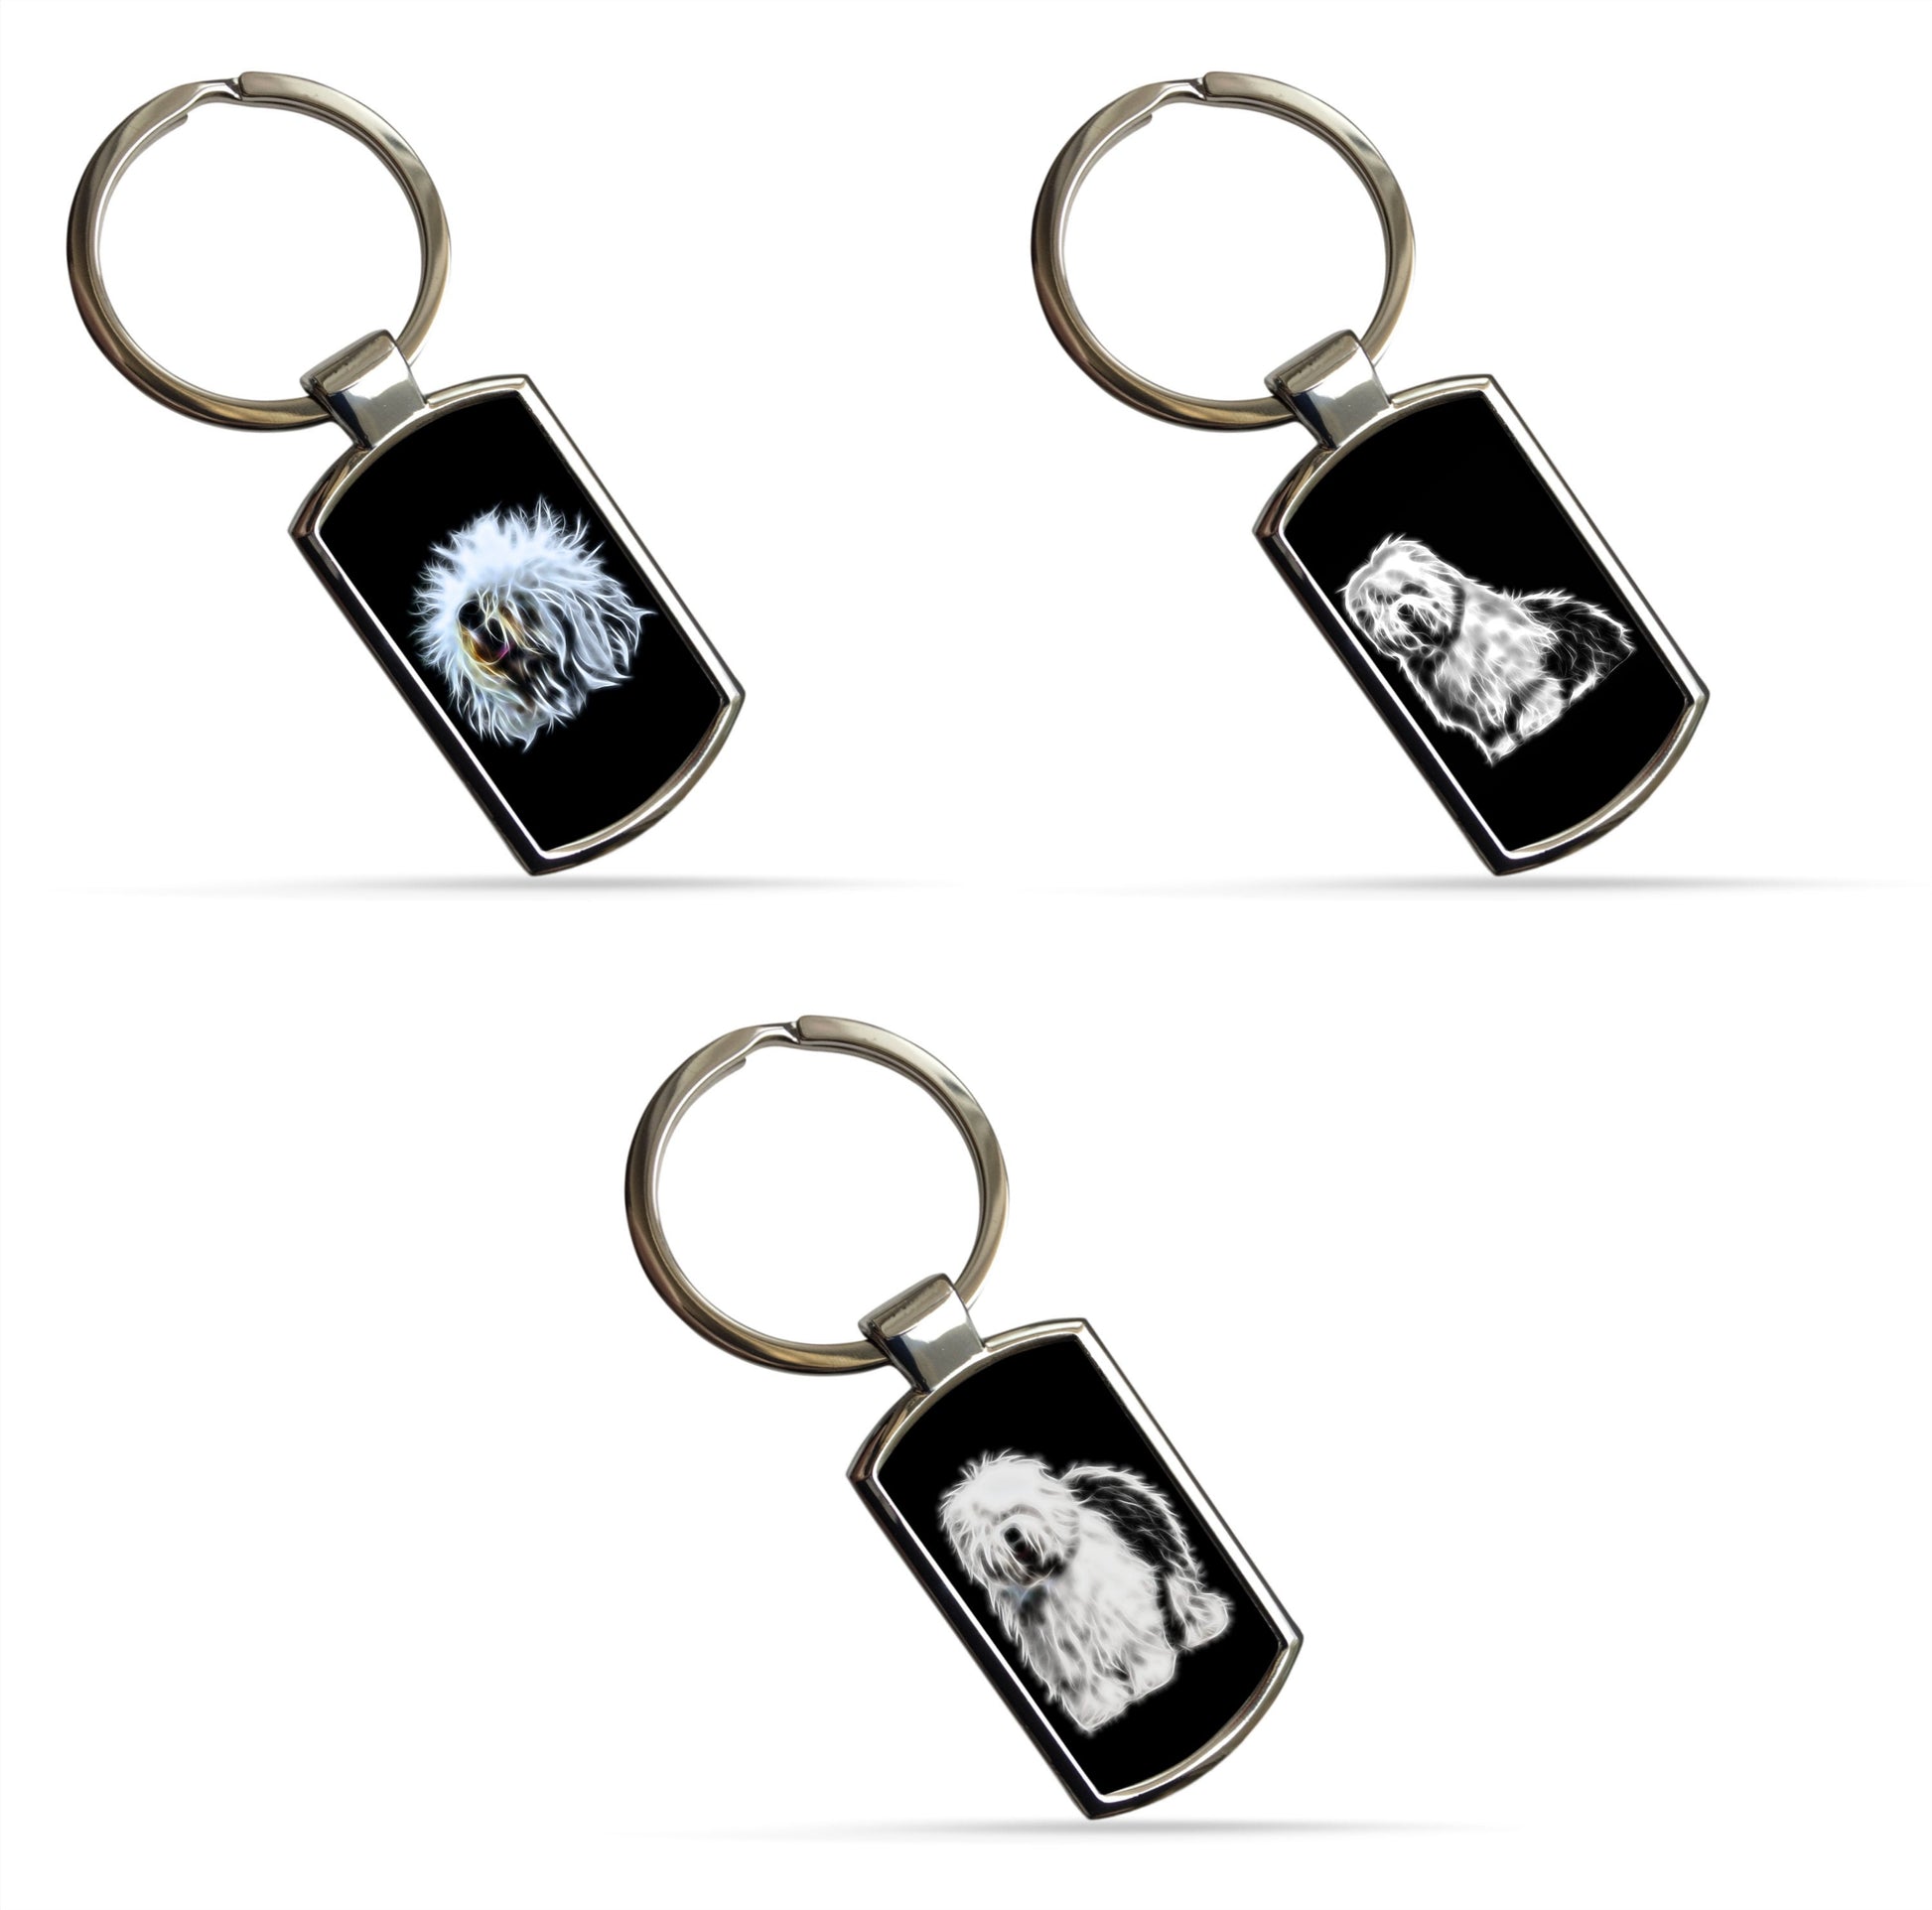 Old English Sheepdog Keychain, Keyring, Bagtag with Stunning Fractal Art Design. A Perfect Gift for Dog Lover.